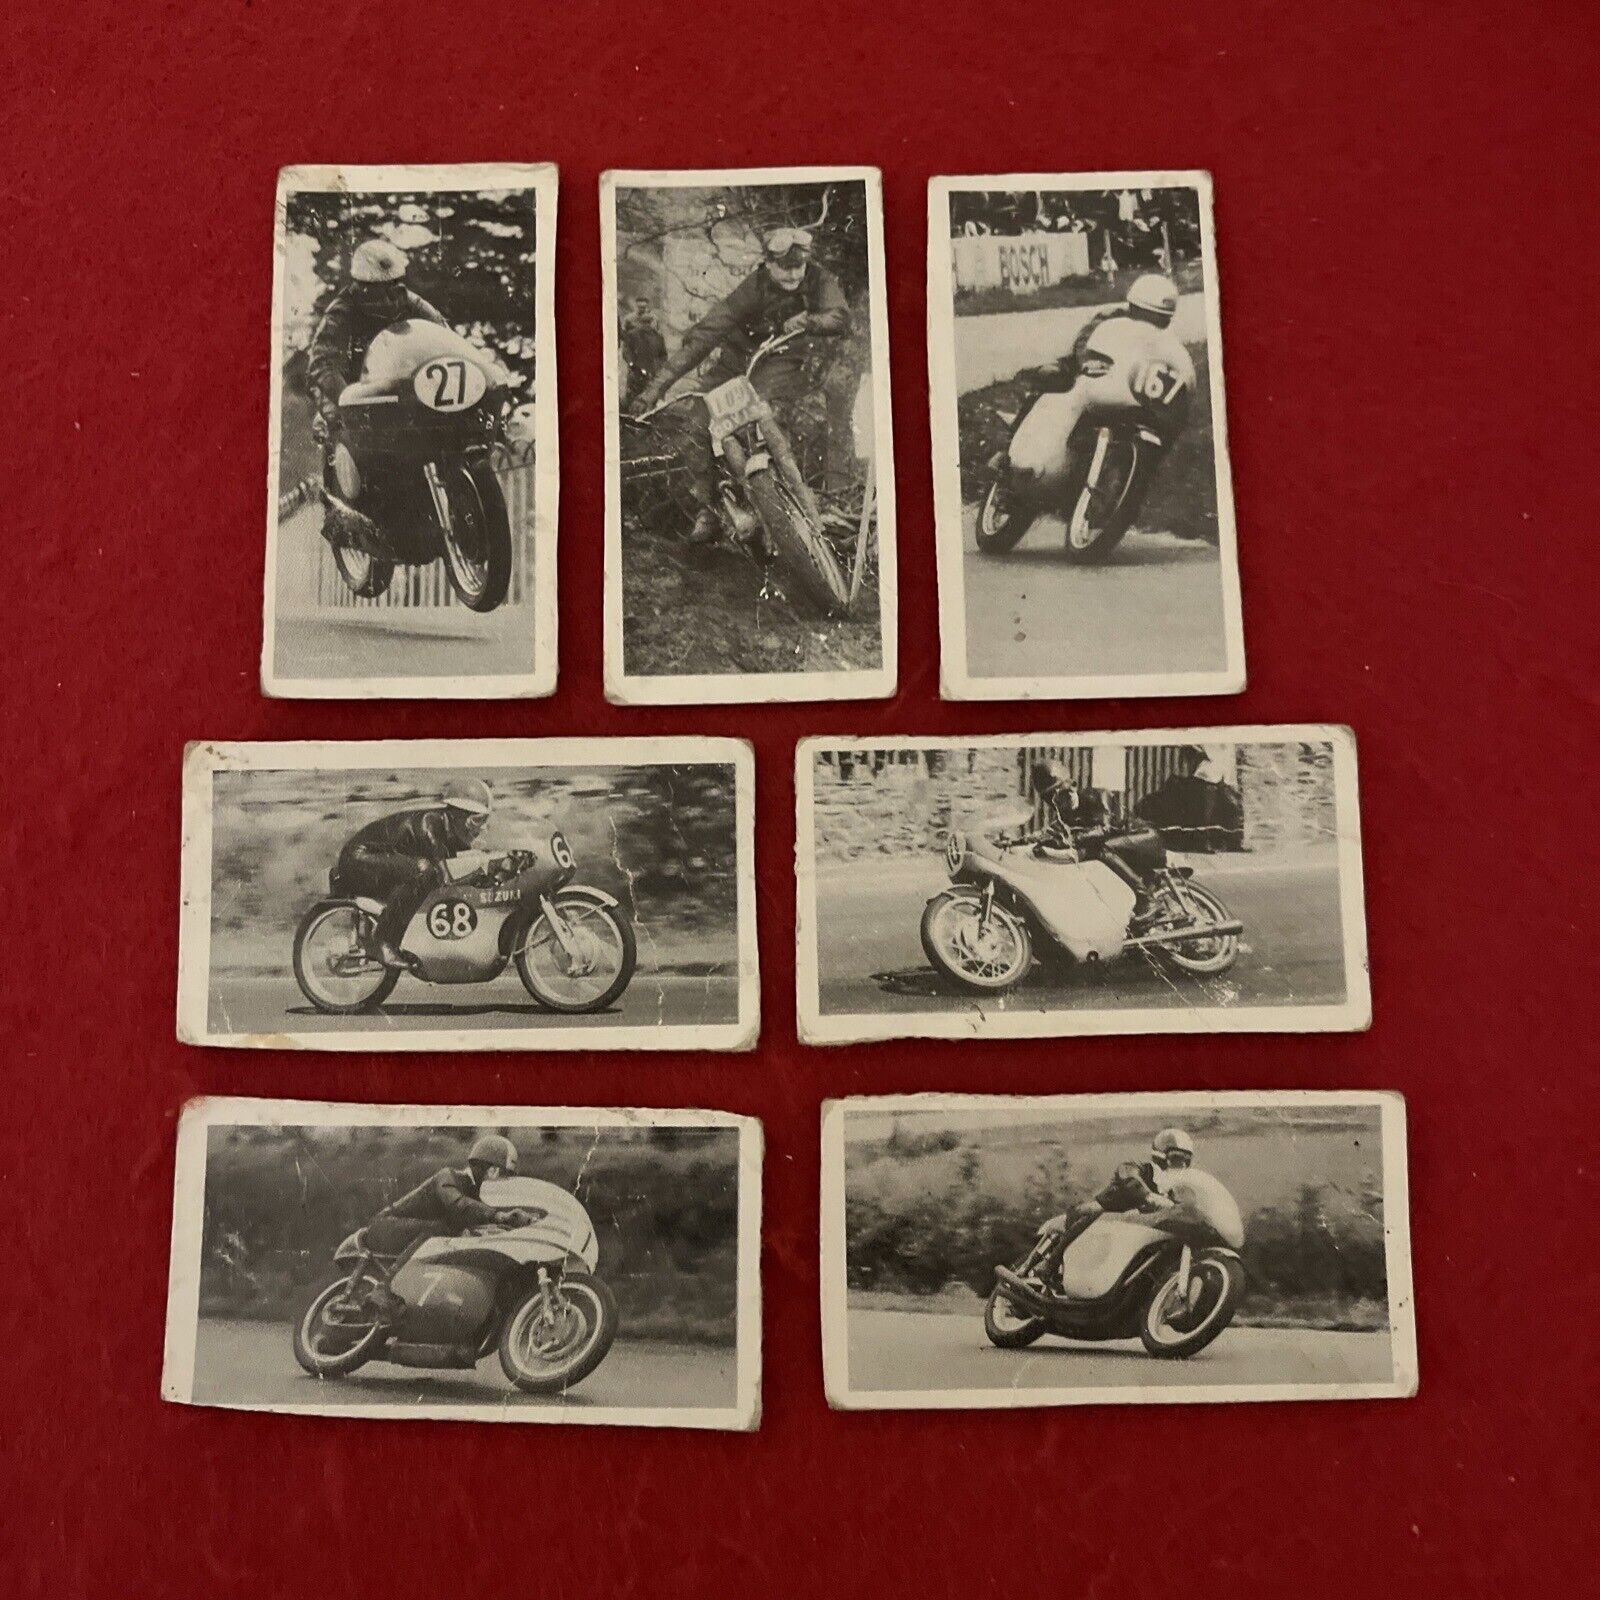 1963 Avon Tyres “Leading Riders Of 1963” MOTORCYCLE Riders Card Lot (7)  All F-G